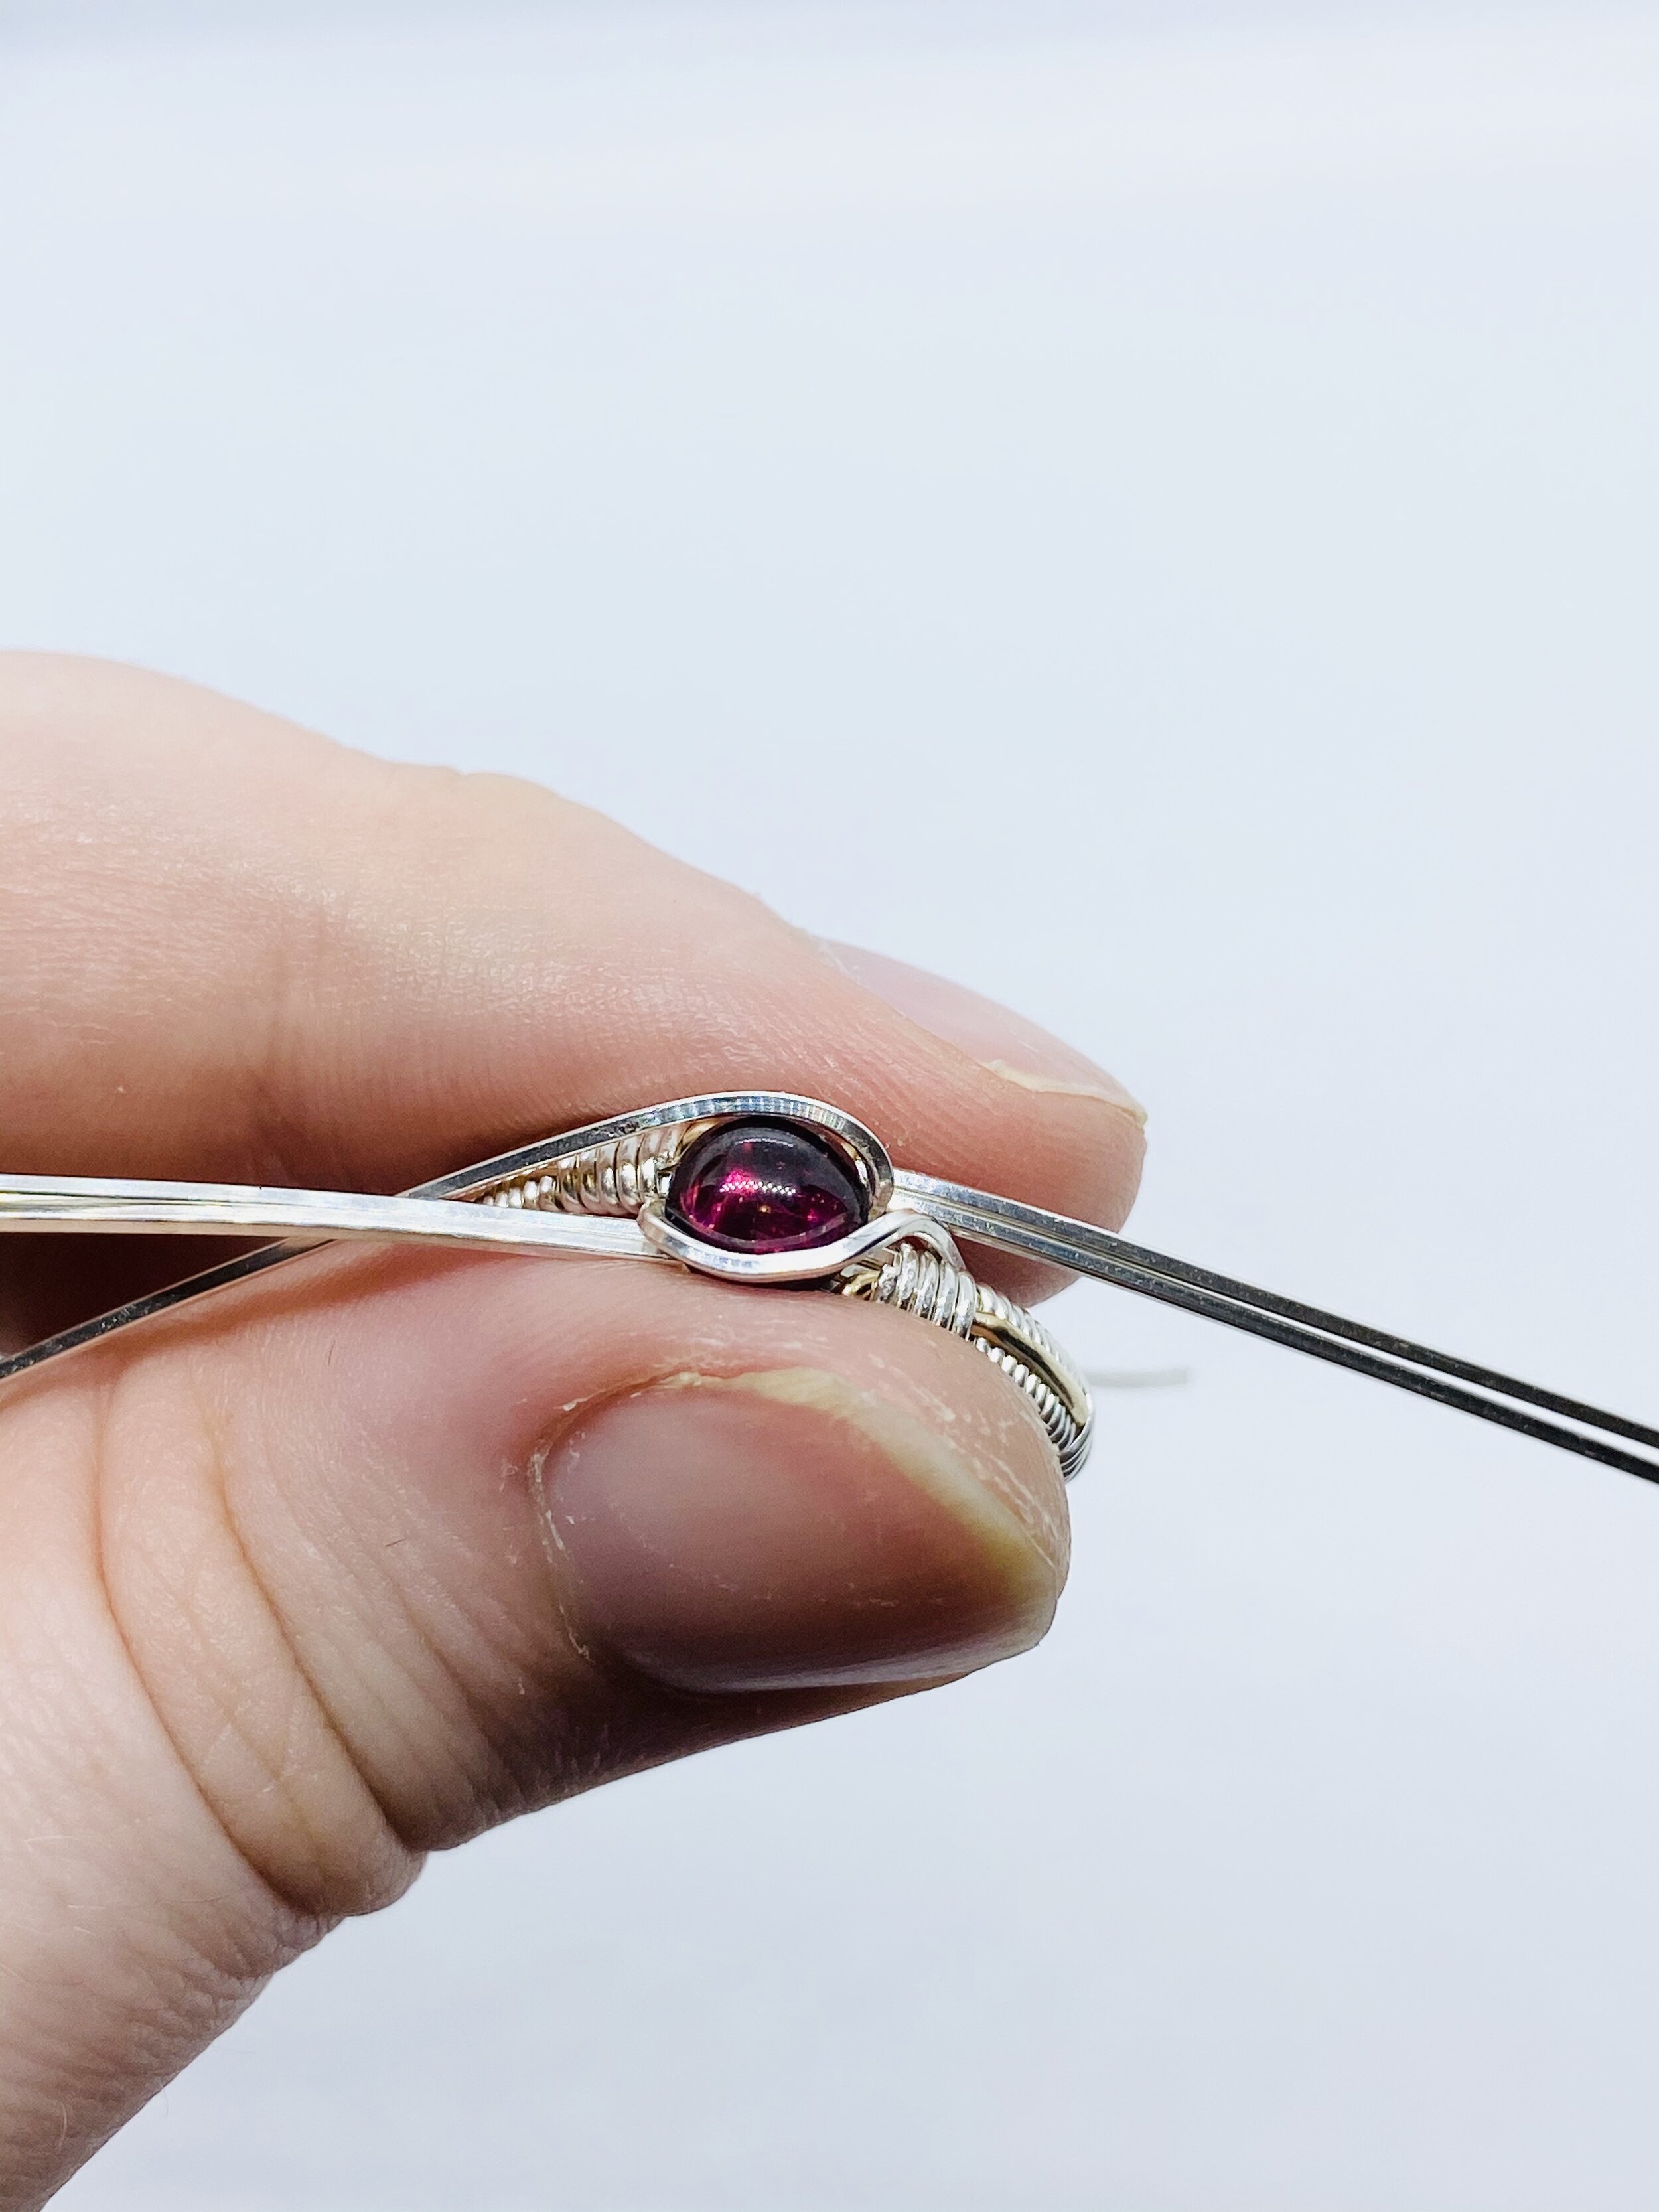 Wire Wrapping, Tools & Materials — The Wobbly Wook